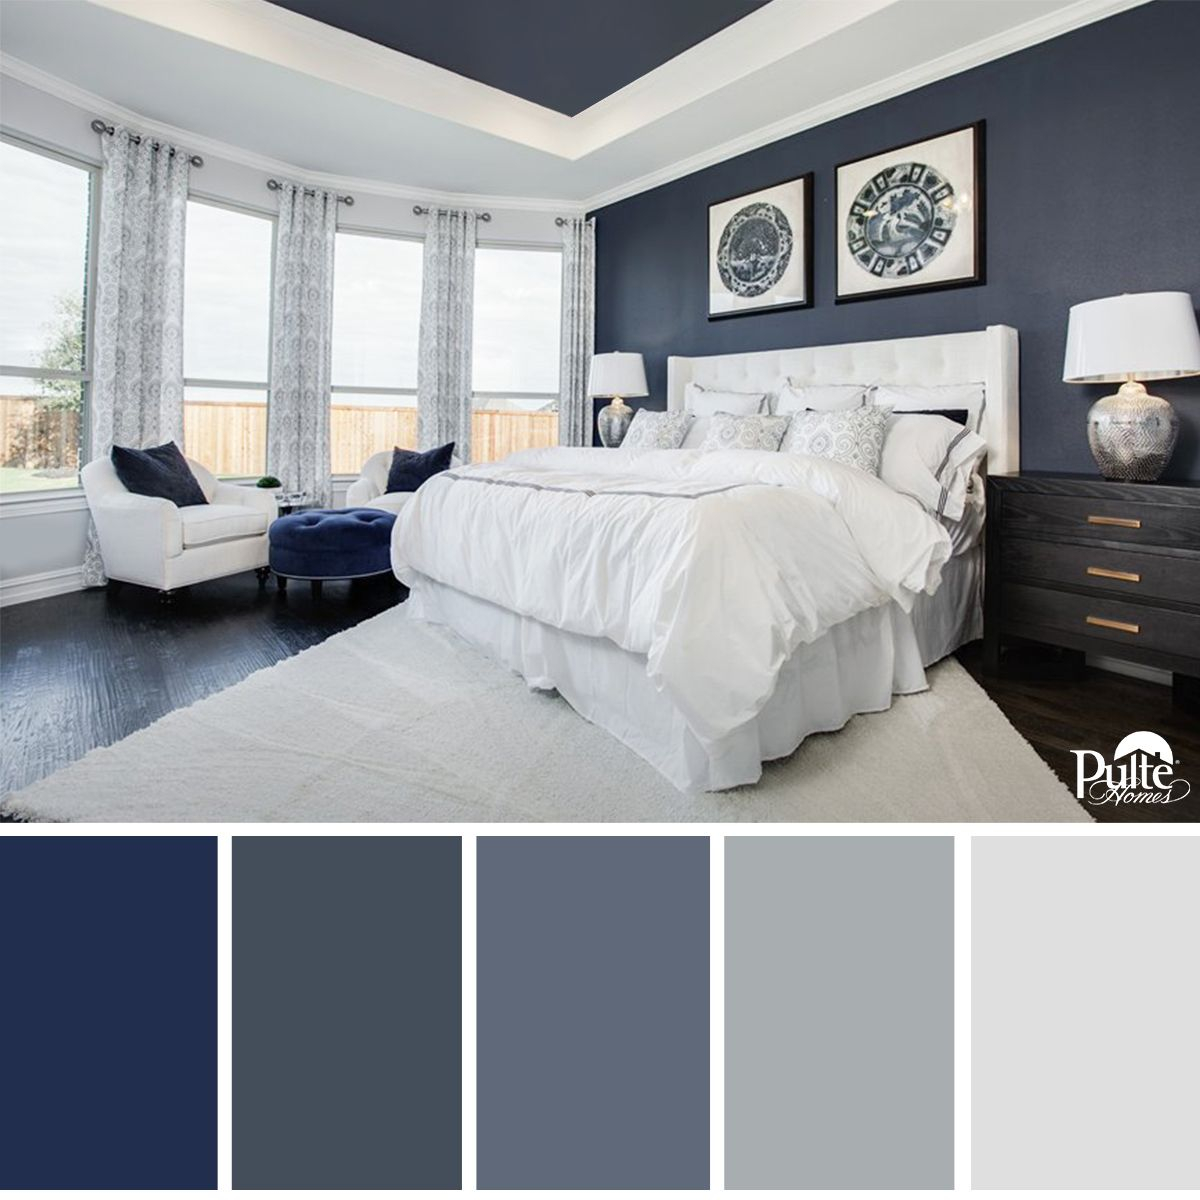 This Bedroom Design Has The Right Idea The Rich Blue Color within size 1200 X 1200